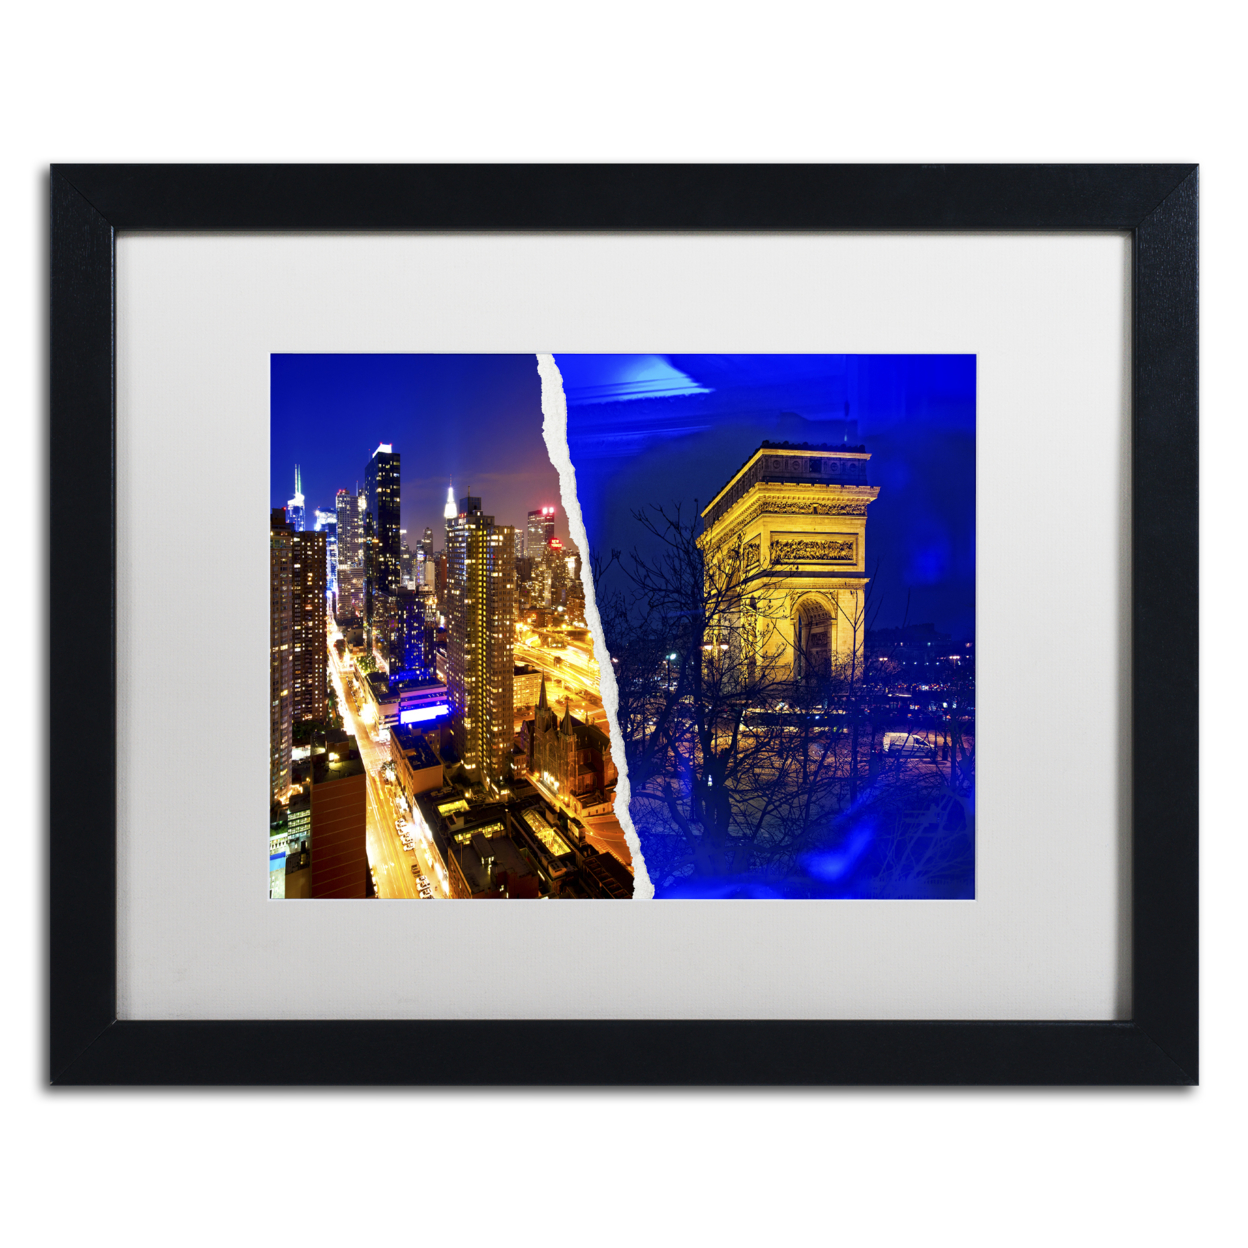 Philippe Hugonnard 'Cities At Night' Black Wooden Framed Art 18 X 22 Inches